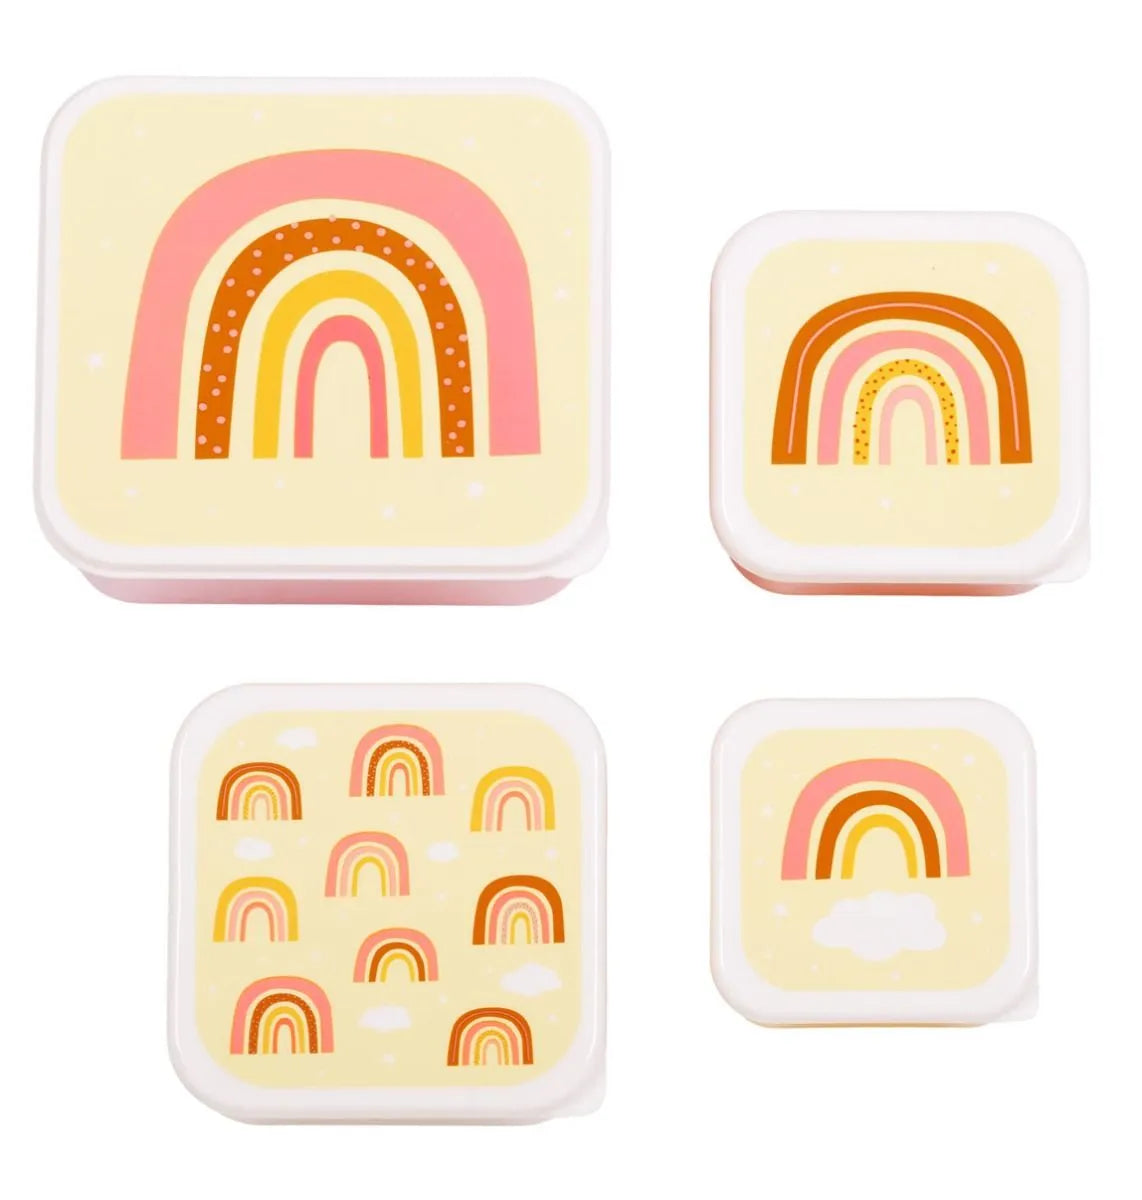 A LITTLE LOVELY COMPANY - Lunch & snack box set - Rainbows